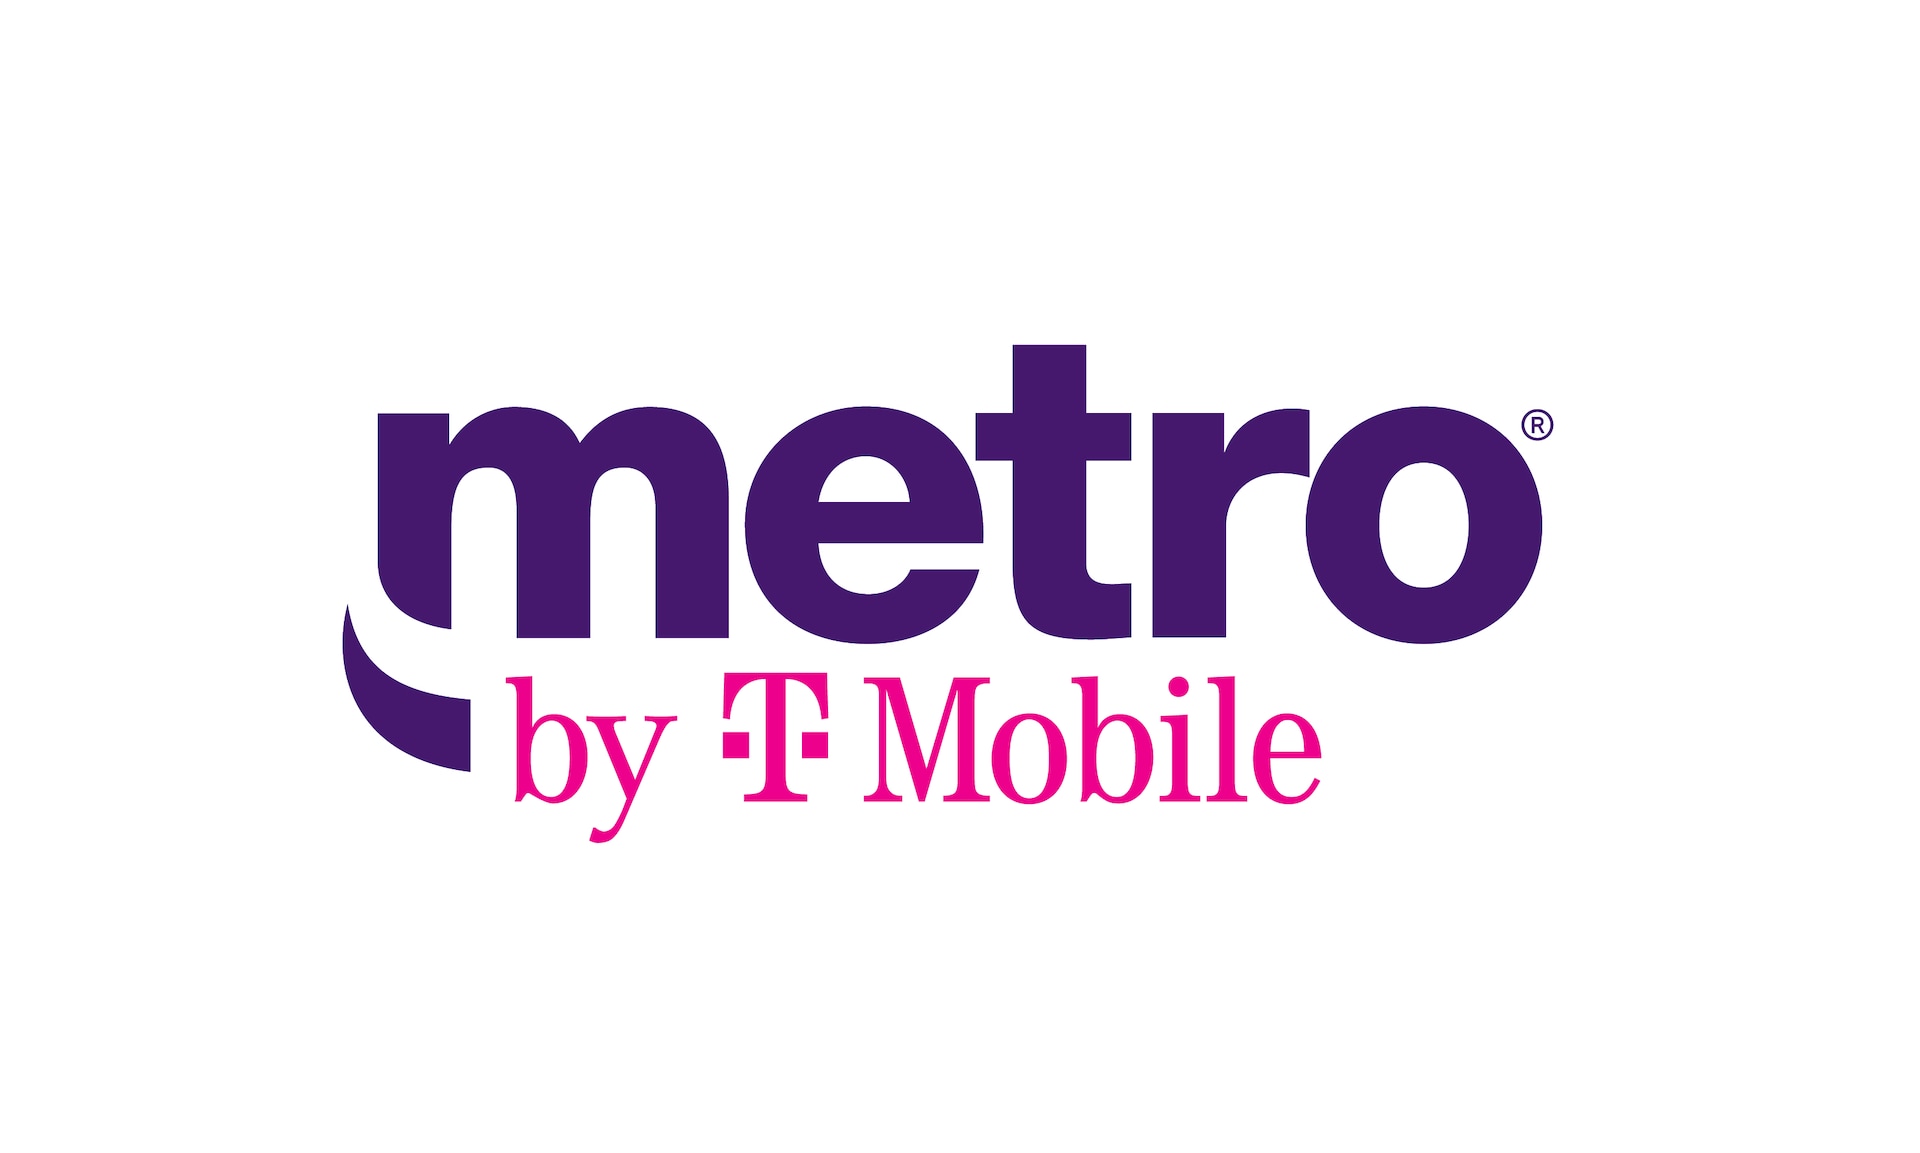 metro-by-t-mobile-logo-purple-and-magenta-on-white-cmyk-jpeg-t